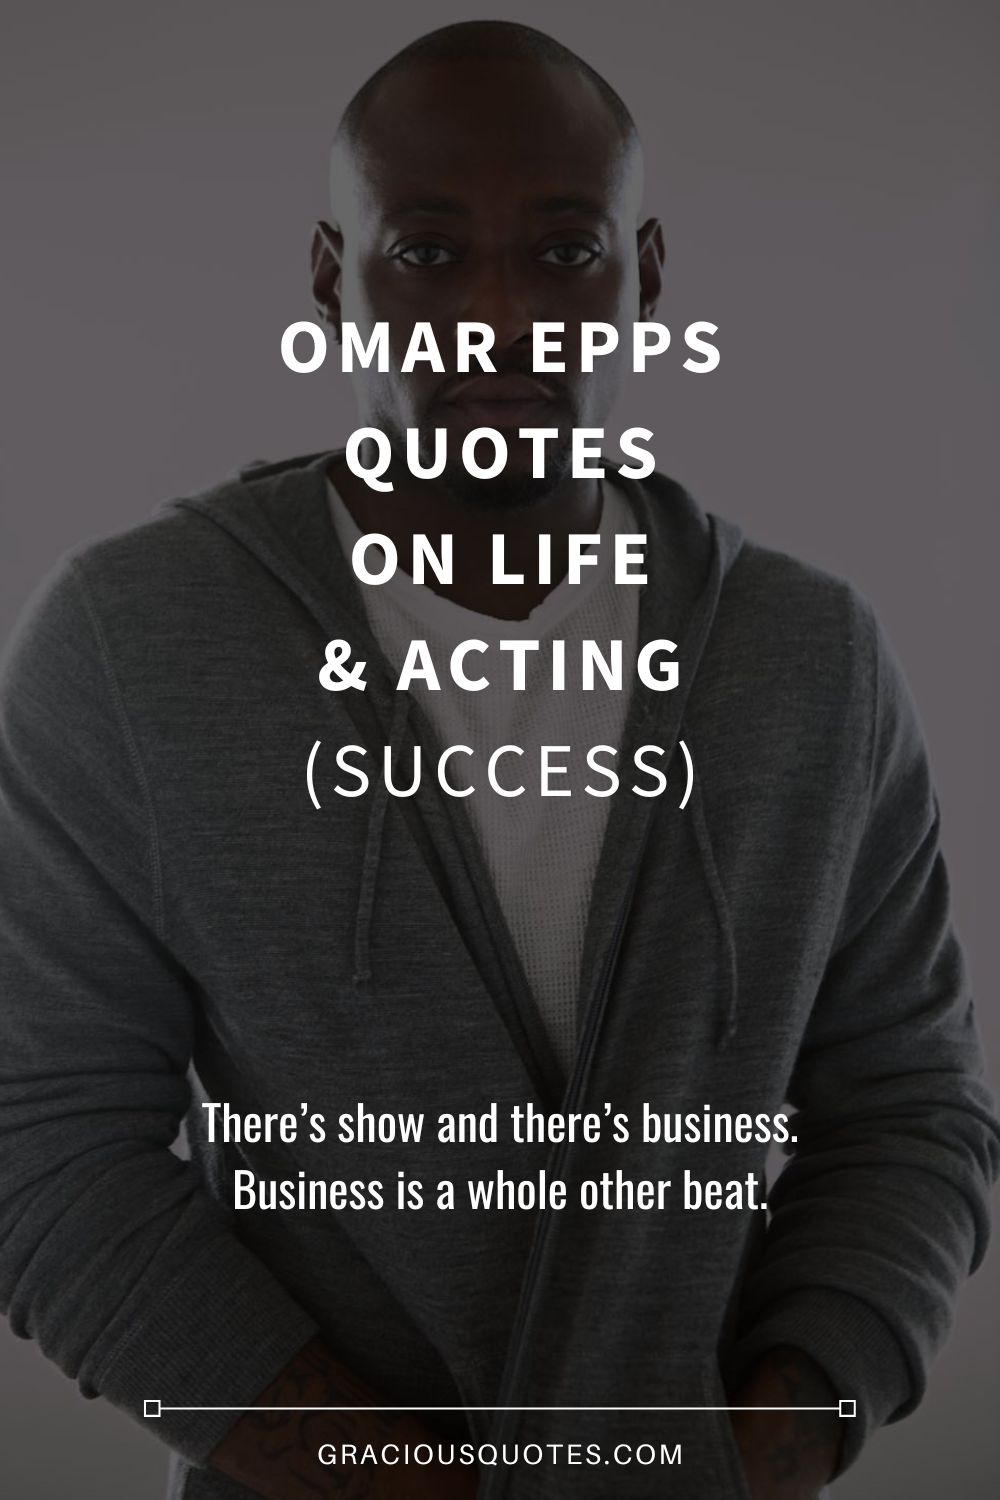 Omar Epps Quotes on Life & Acting (SUCCESS) - Gracious Quotes